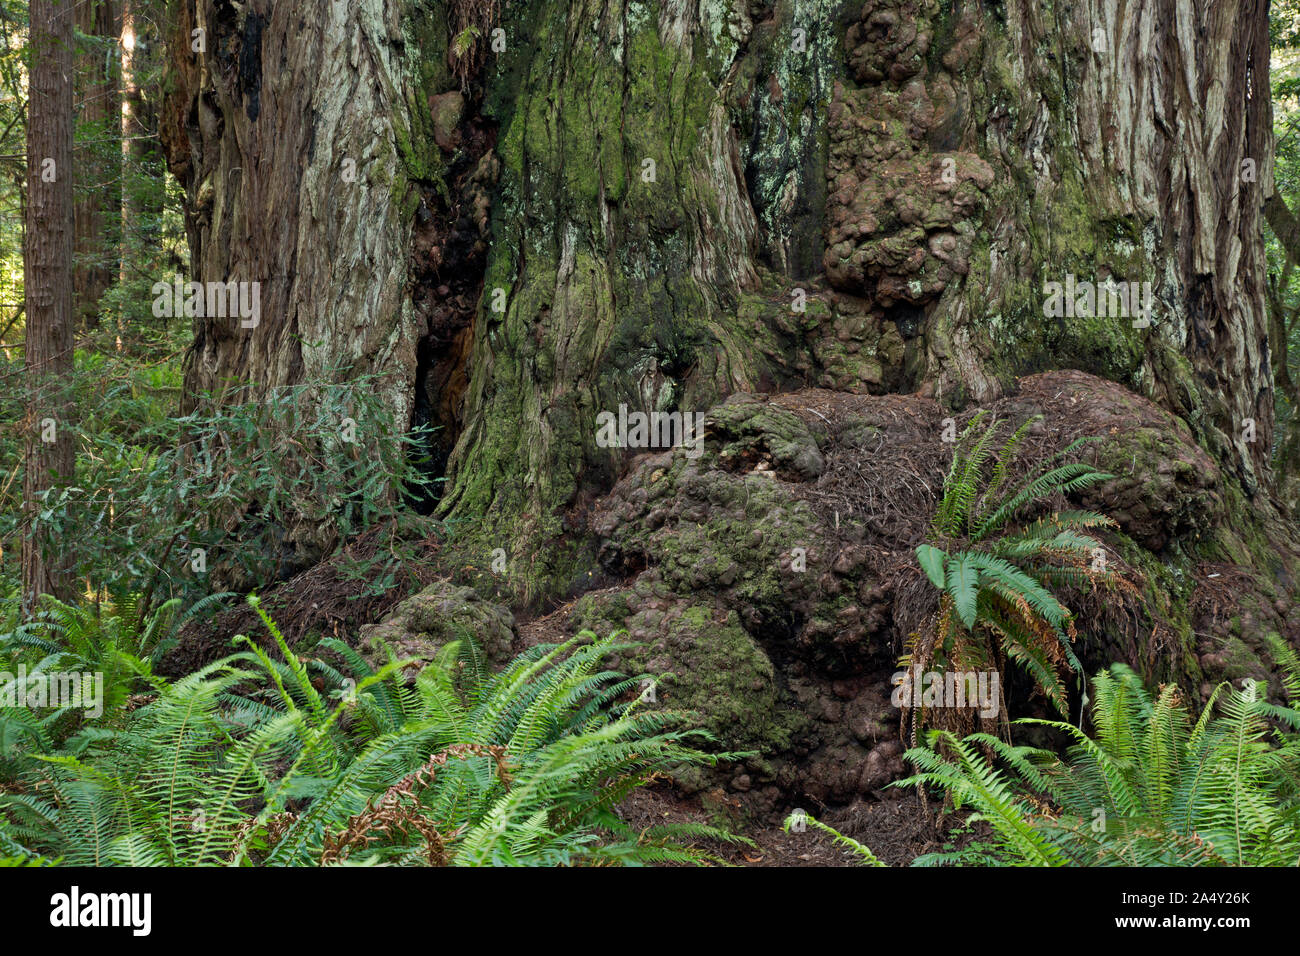 CA03698-00...CALIFORNIA - The gnarled base of an ancient redwood tree in the Big Trees Grove of Redwoods National Park. Stock Photo